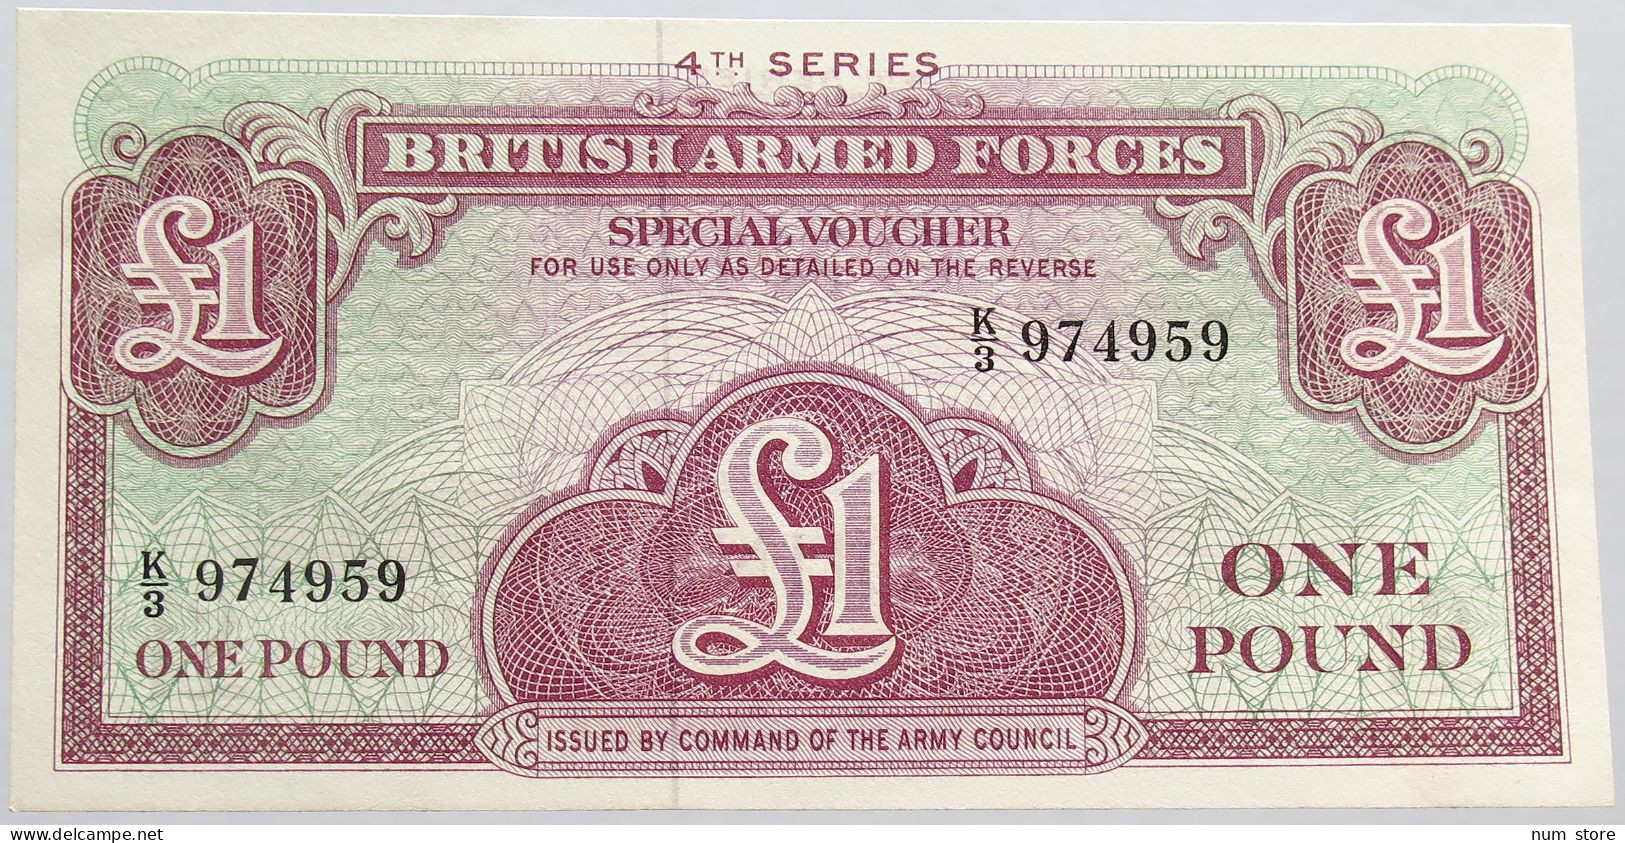 BRITISH ARMED FORCES 1 POUND #alb015 0003 - British Armed Forces & Special Vouchers